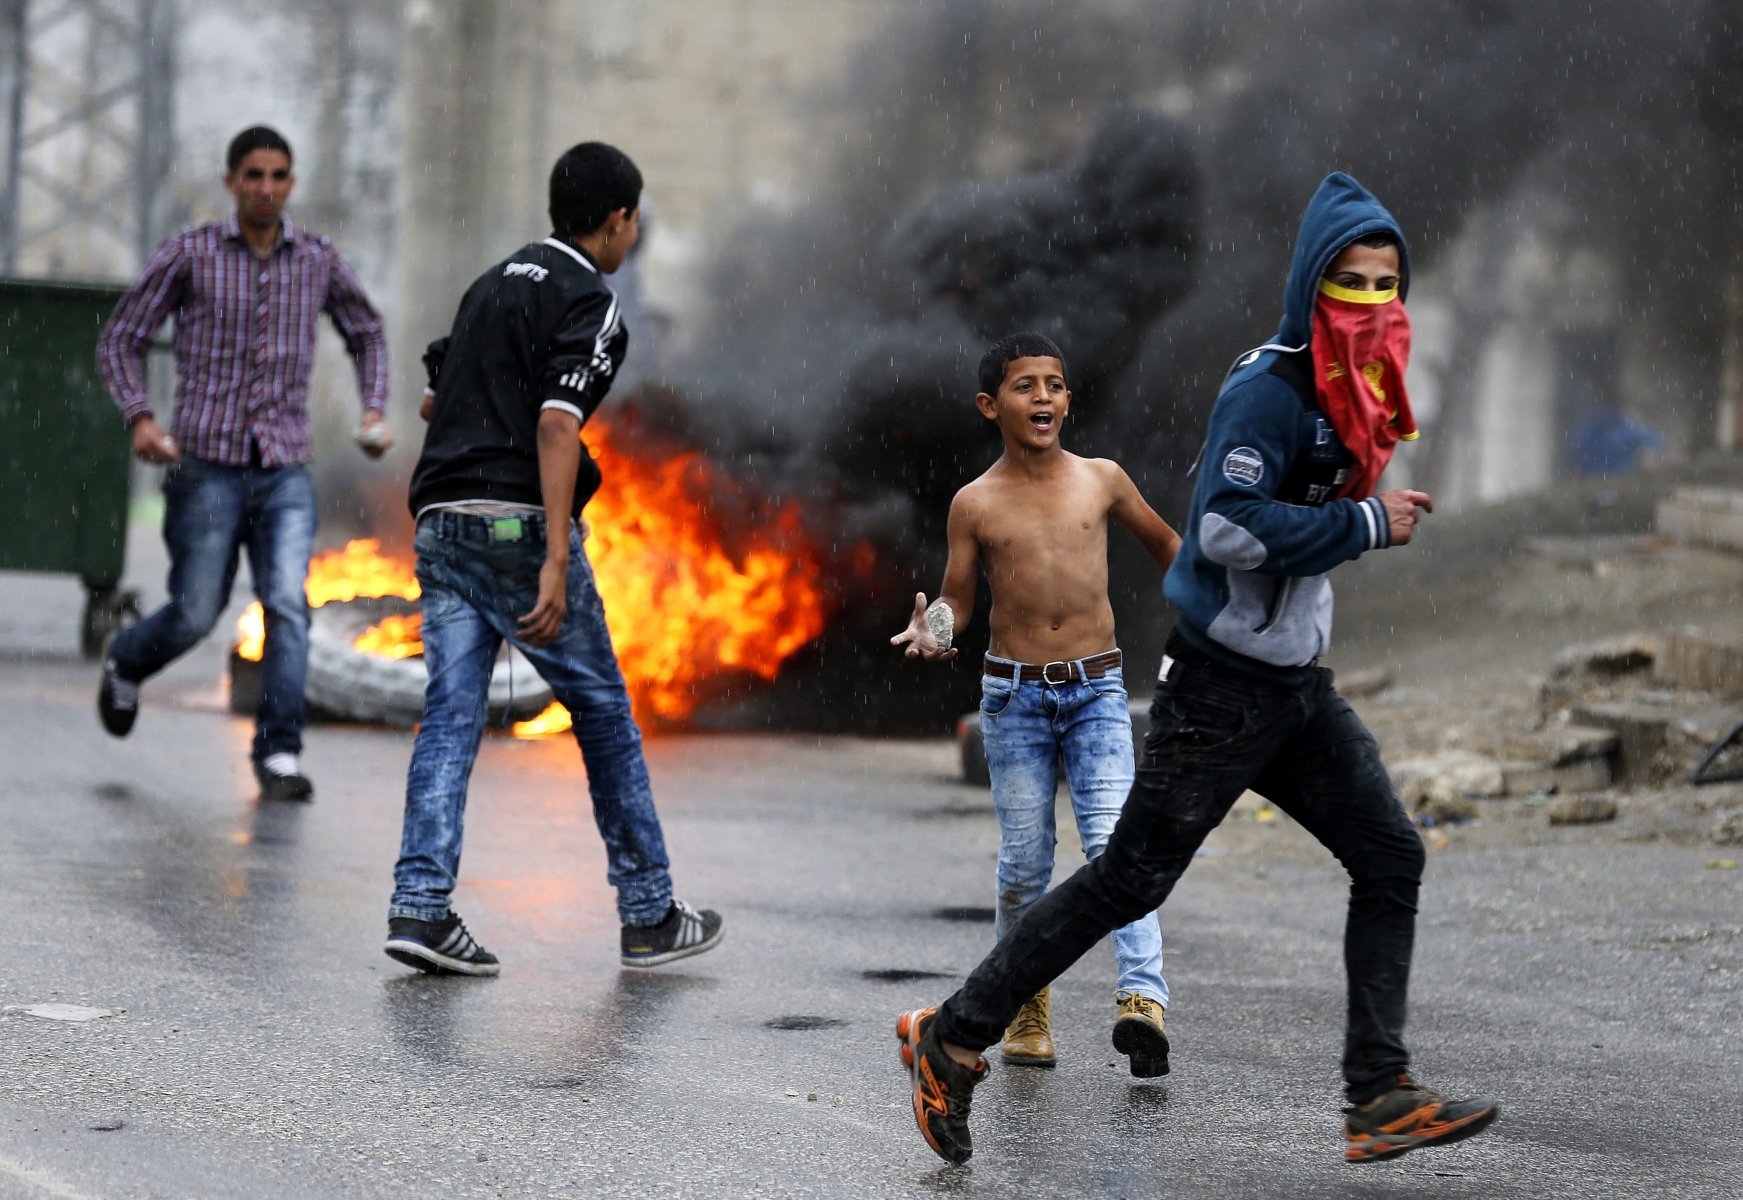 epa04994831 Palestinian protesters throw stones during clashes with Israeli soldiers in the West Bank village of Si'eer, north of Hebron , 25 October 2015. More than three weeks of unrest between Israelis and Palestinians has left more than 65 people dead. These include 57 Palestinians, eight Israelis and an Eritrean asylum seeker who was mistaken for an attacker and beaten to death by a mob in Israel.  EPA/ABED AL HASHLAMOUN MIDEAST PALESTINIANS ISRAEL